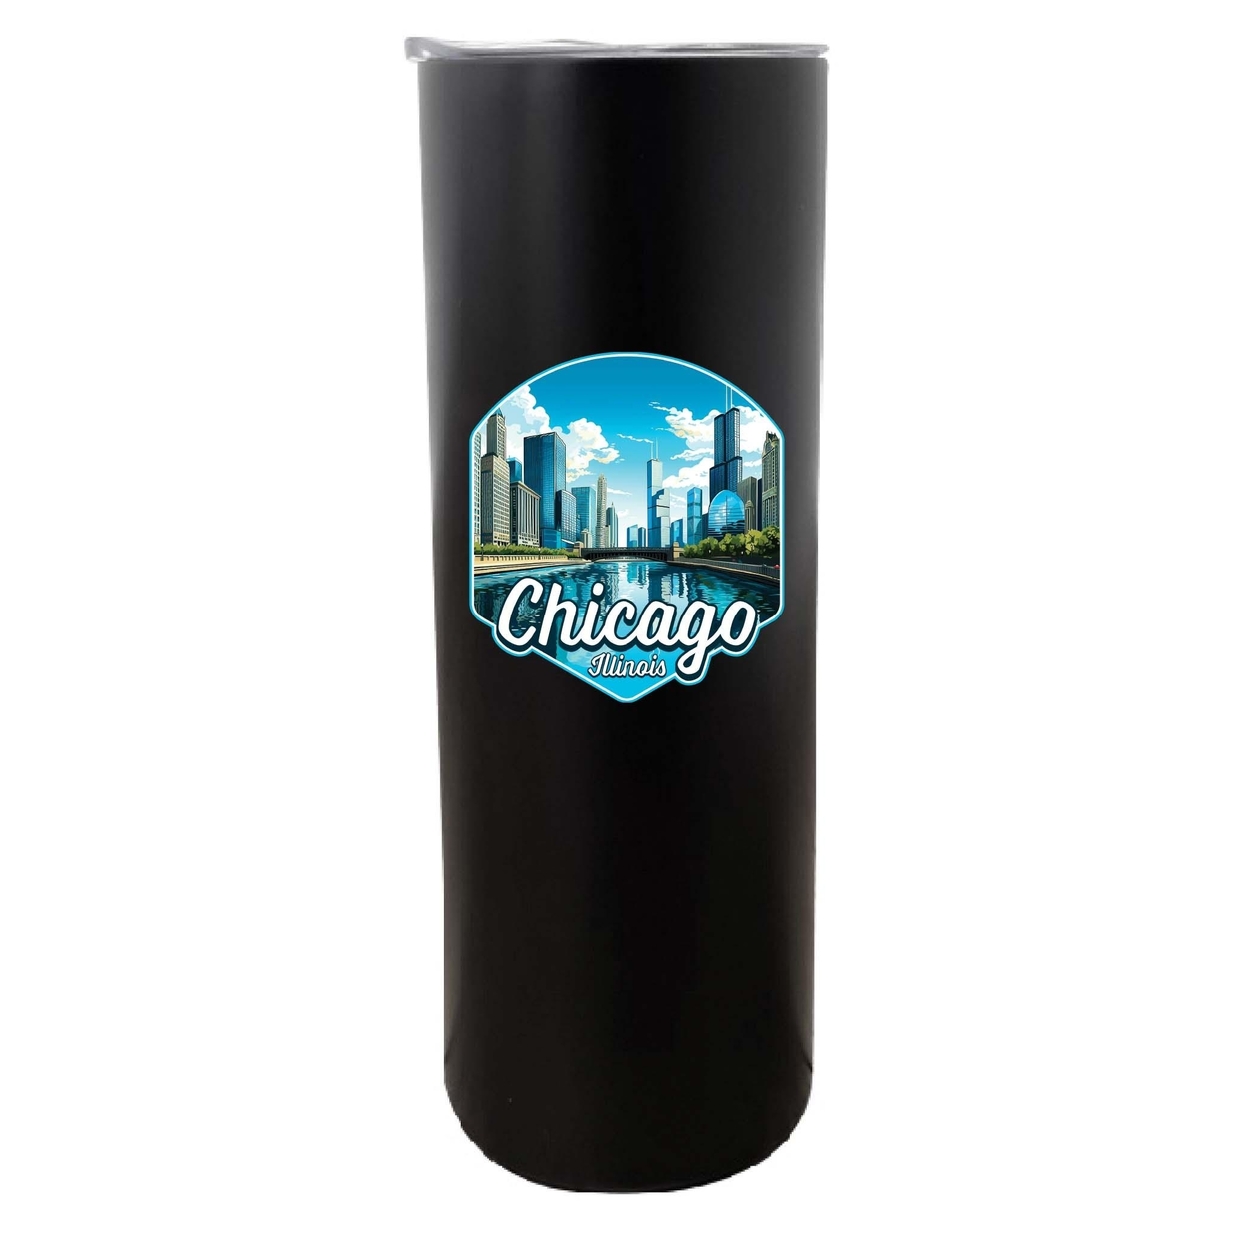 Chicago Illinois A Souvenir 20 Oz Insulated Skinny Tumbler - Navy,,4-Pack